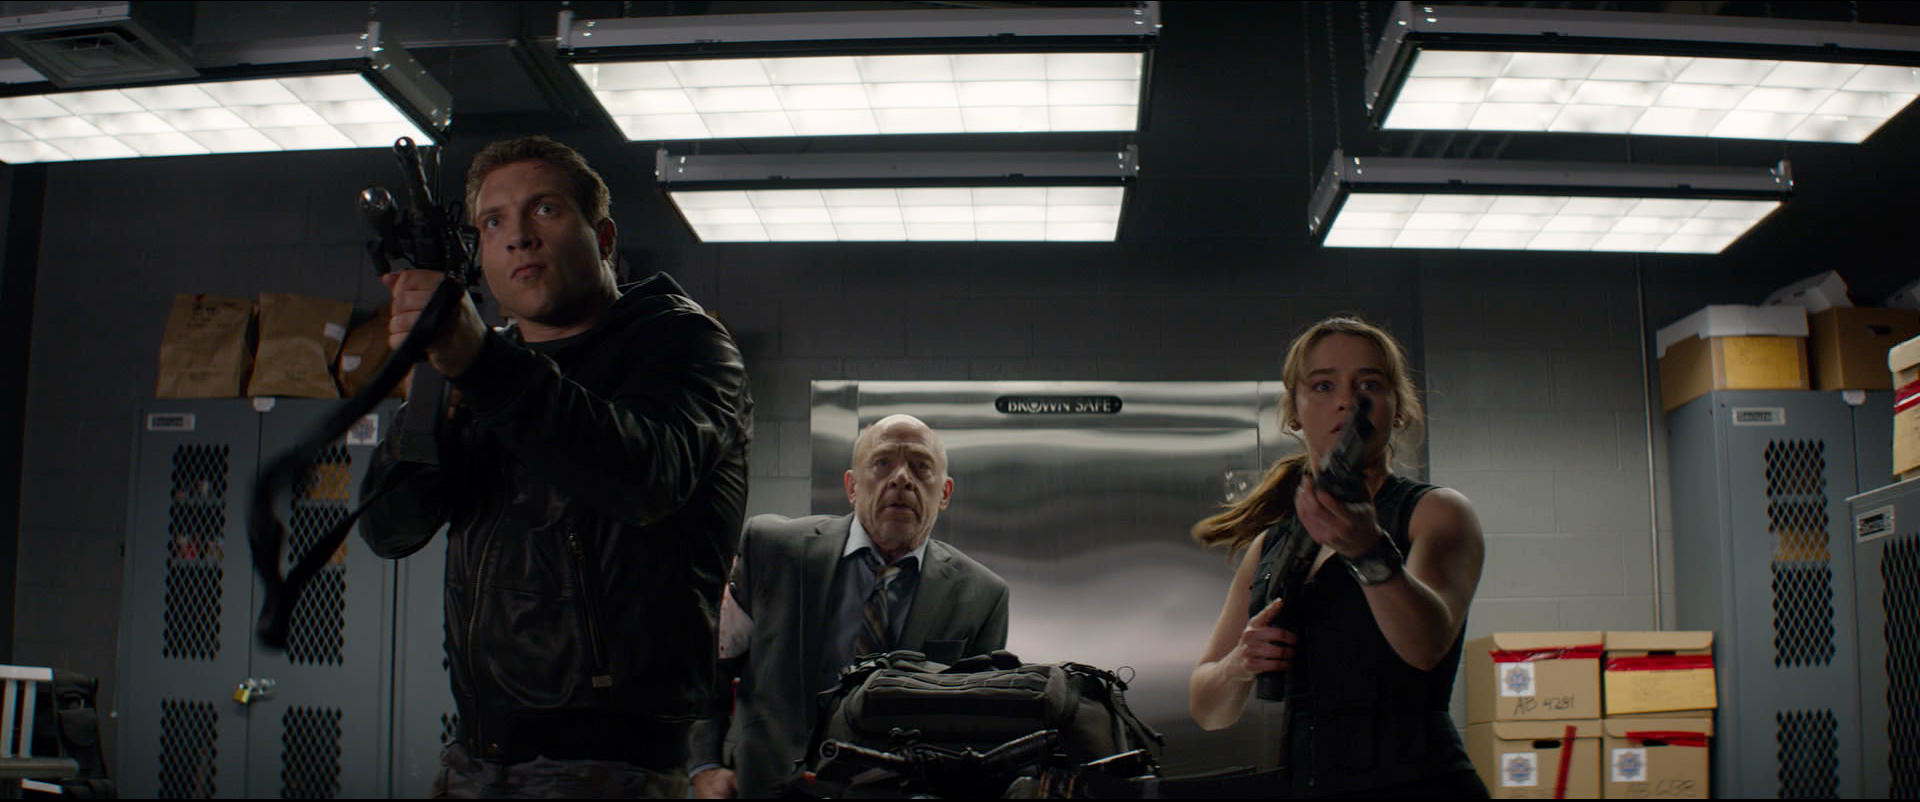 Left to right: Jai Courtney plays Kyle Reese, JK Simmons plays Detective O’Brien, and Emilia Clarke plays Sarah Connor in Terminator Genisys from Paramount Pictures and Skydance Productions.